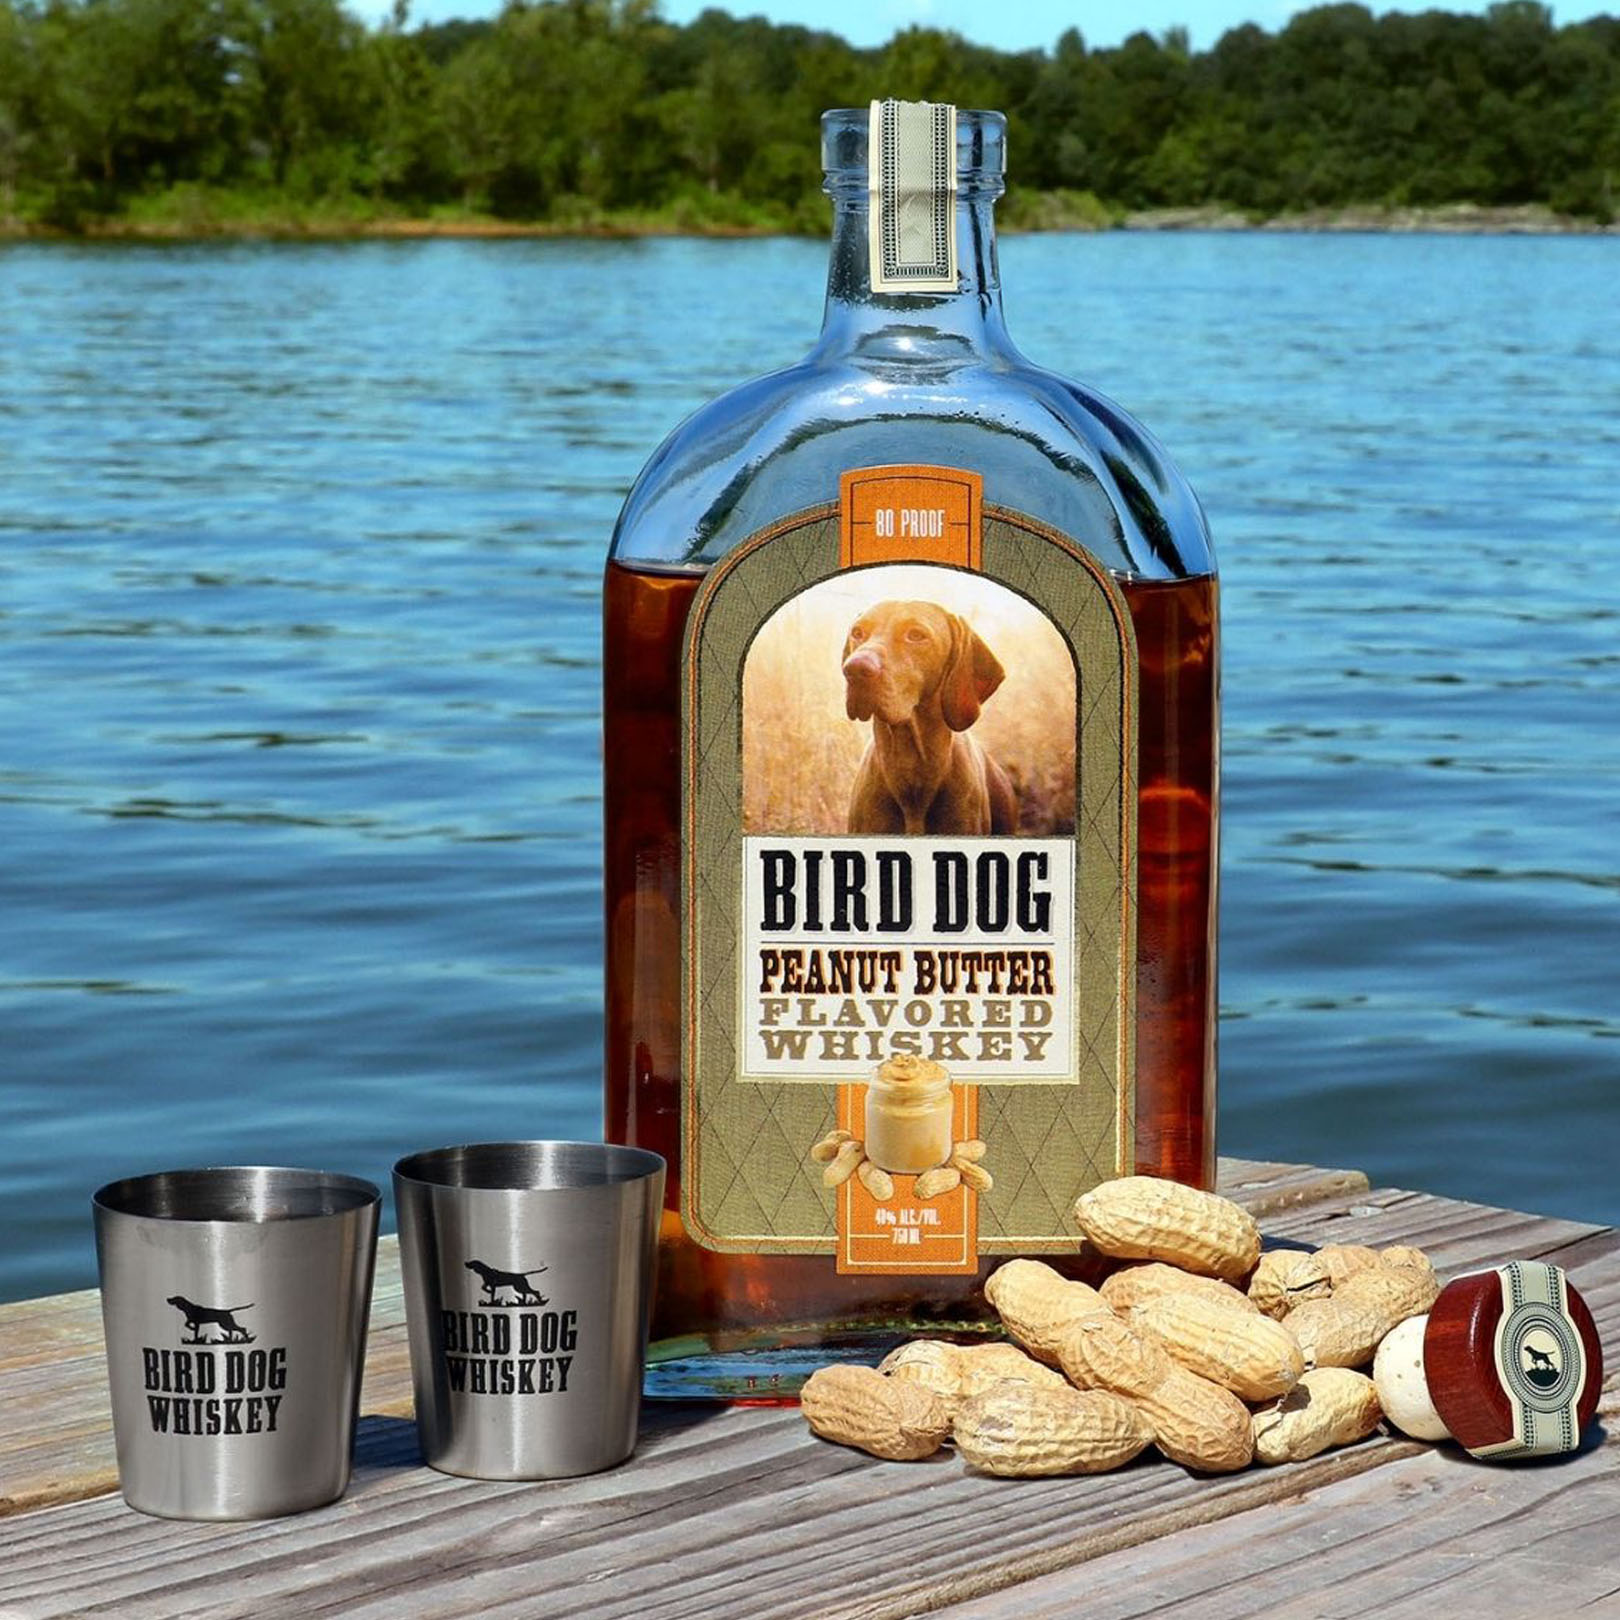 Bottle of Bird Dog Peanut Butter Whiskey Sitting on Table with Peanuts